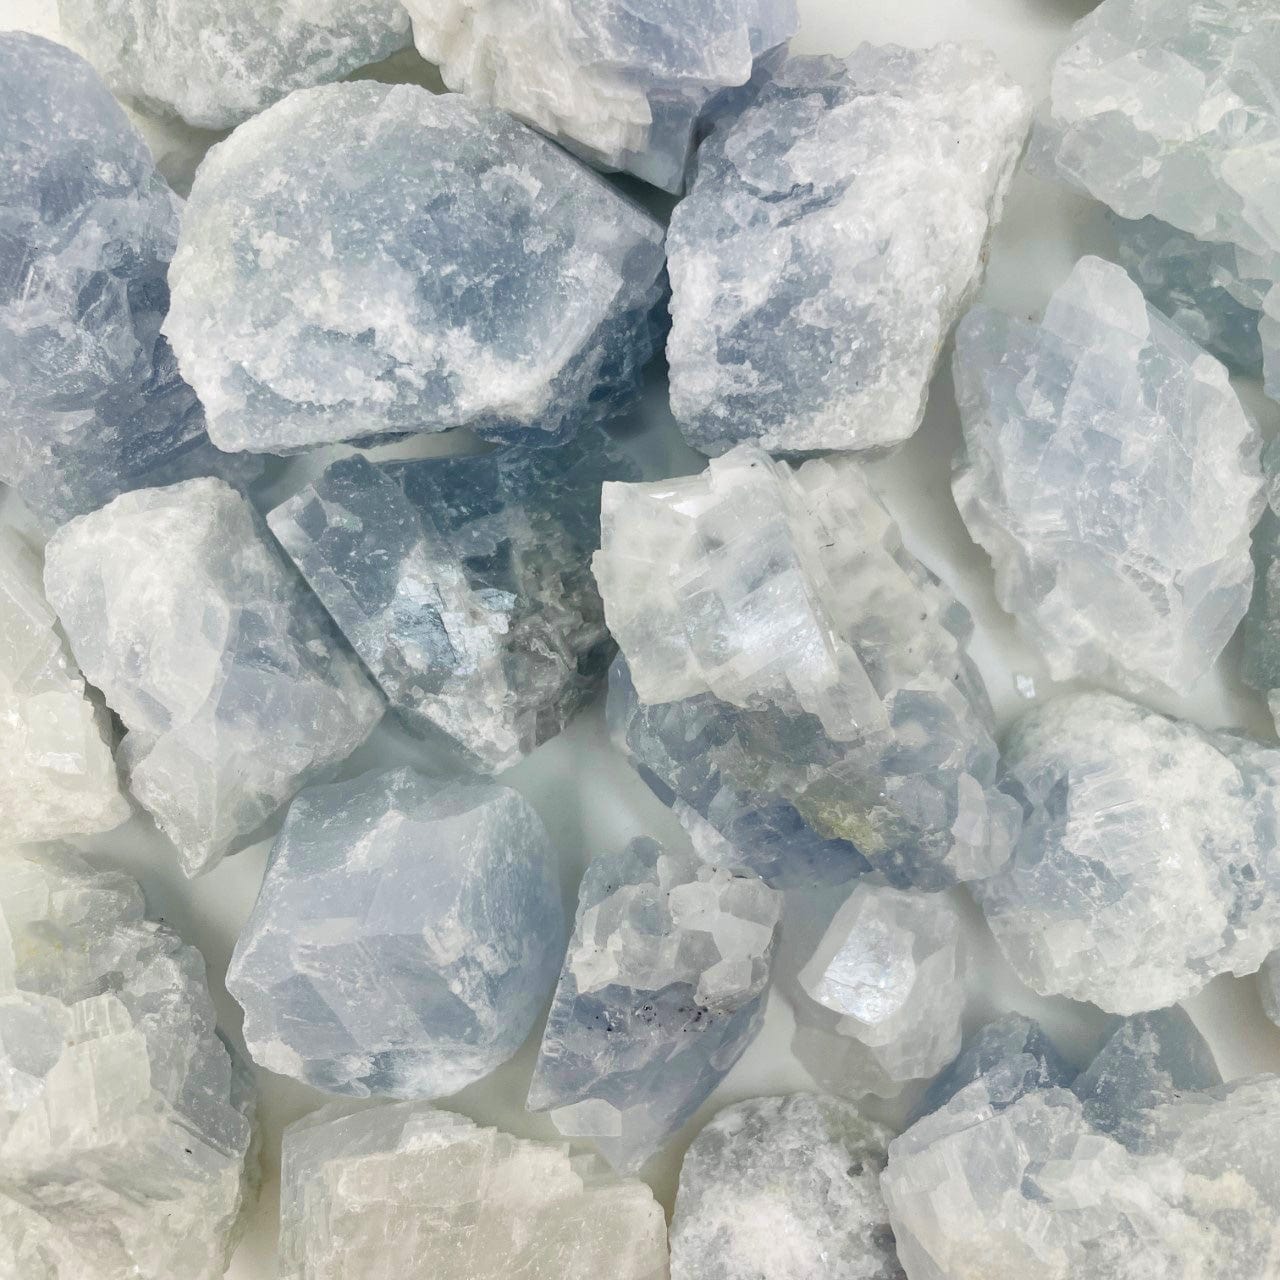 Celestite Stones on a table showing beautiful blue colora